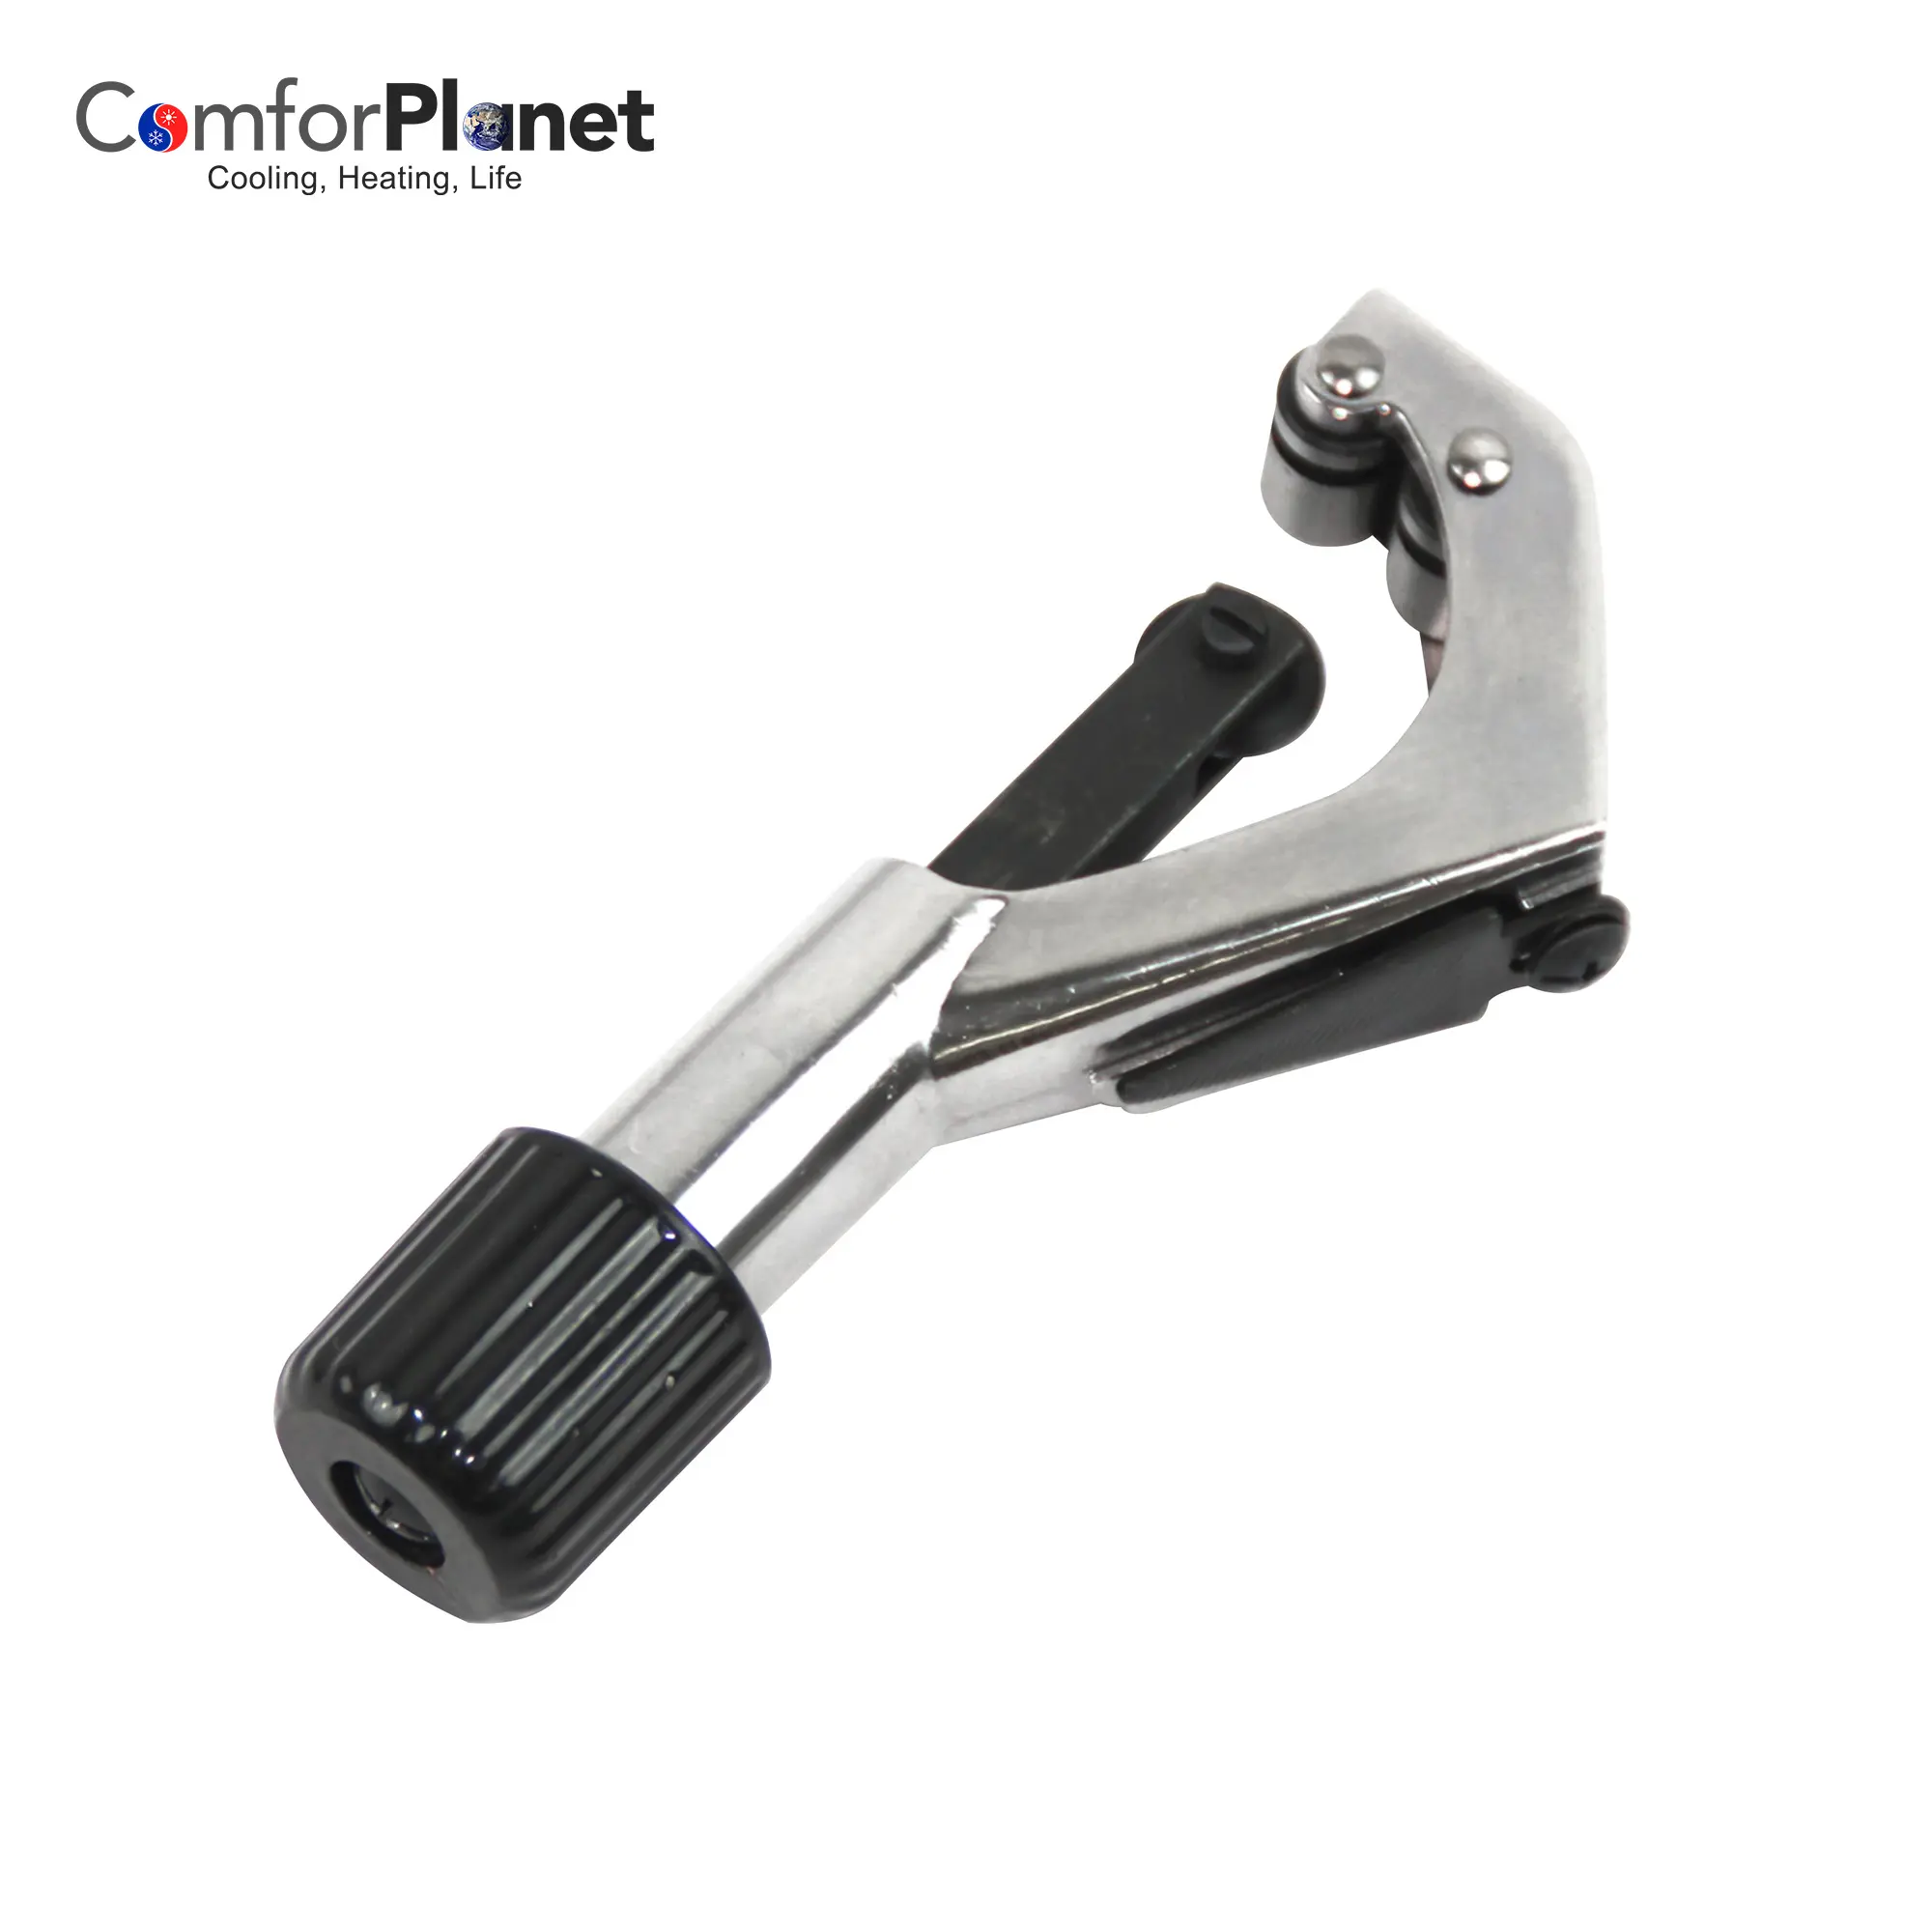 Factory price CT-312 Copper r 1/4" to 1-5/8" refrigeration Tube Pipe Cutter for air conditioning copper tube